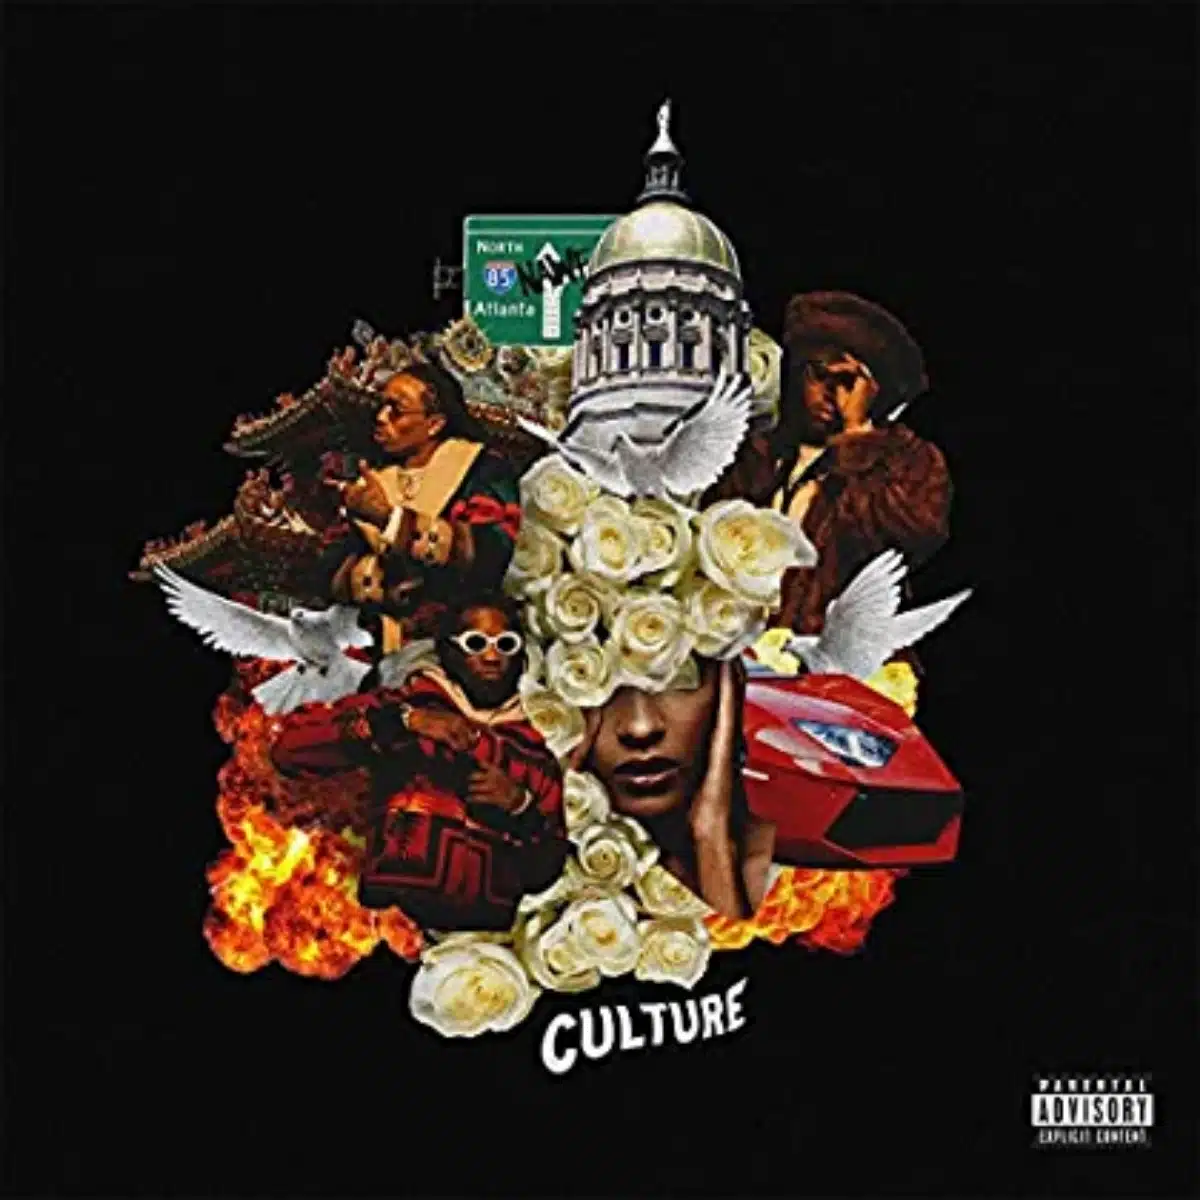 DOWNLOAD: Migos Ft. Lil Uzi Vert – “Bad And Boujee” Mp3